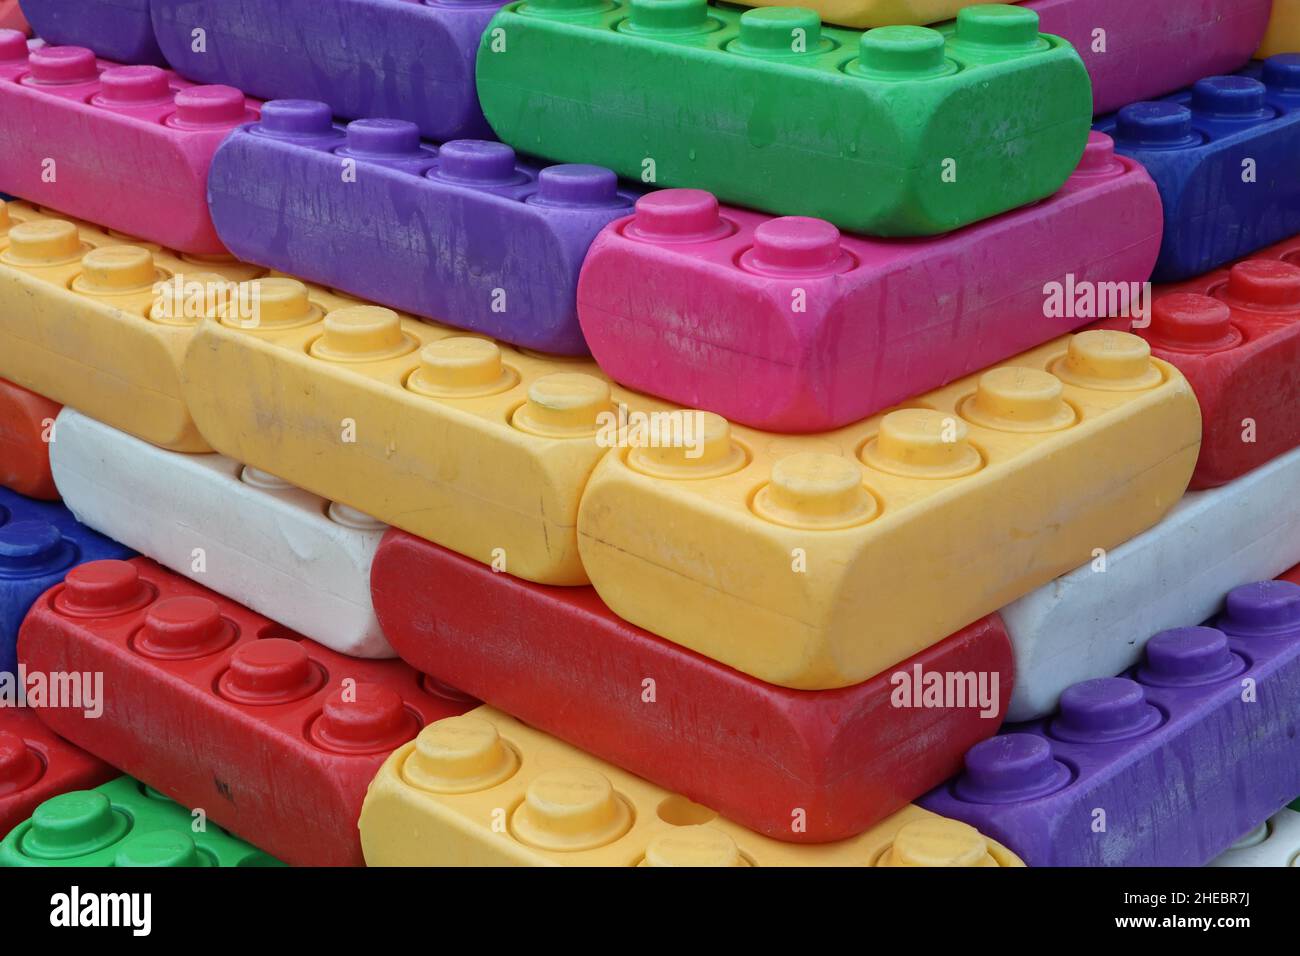 colorful stacked plastic building blocks for children Stock Photo